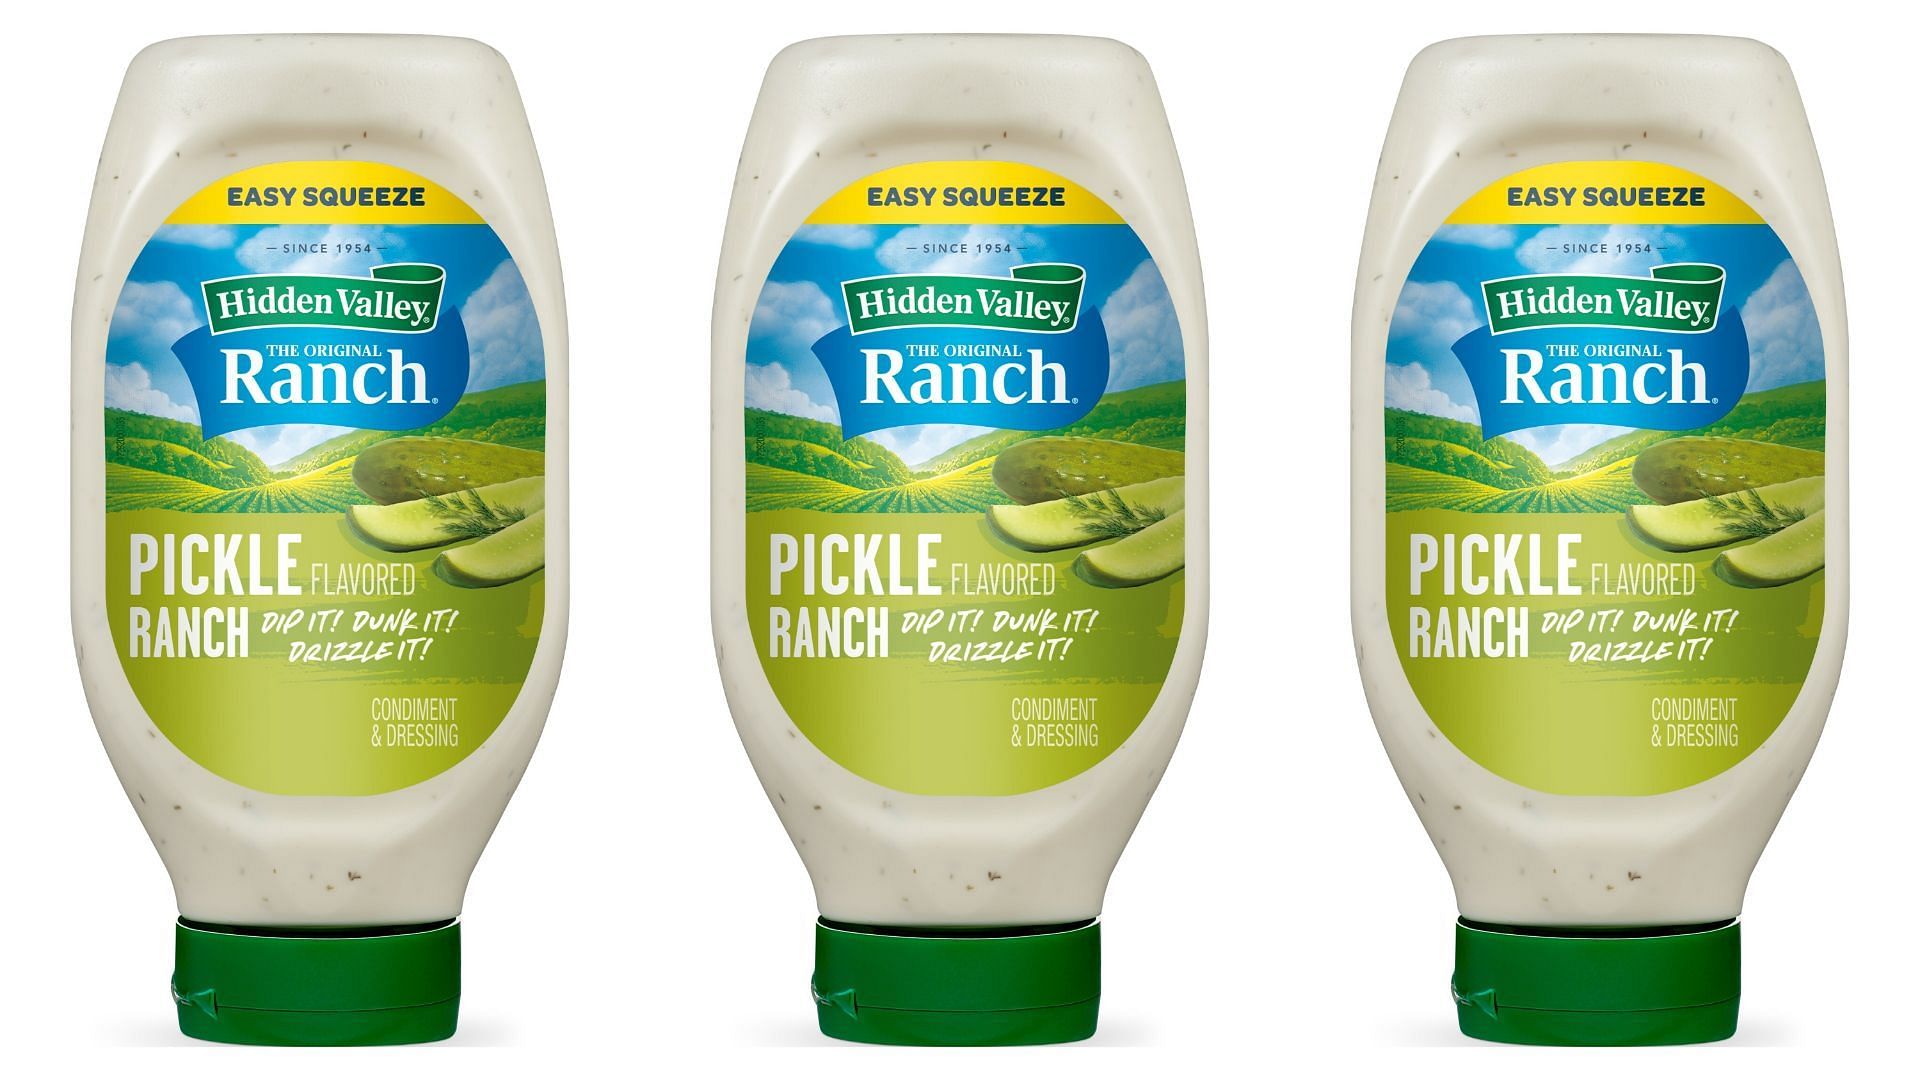 The new Dill Pickle-Flavored Ranch will be available at Walmart stores across the United States (Image via Hidden Valley Ranch Makers/PR Newswire)